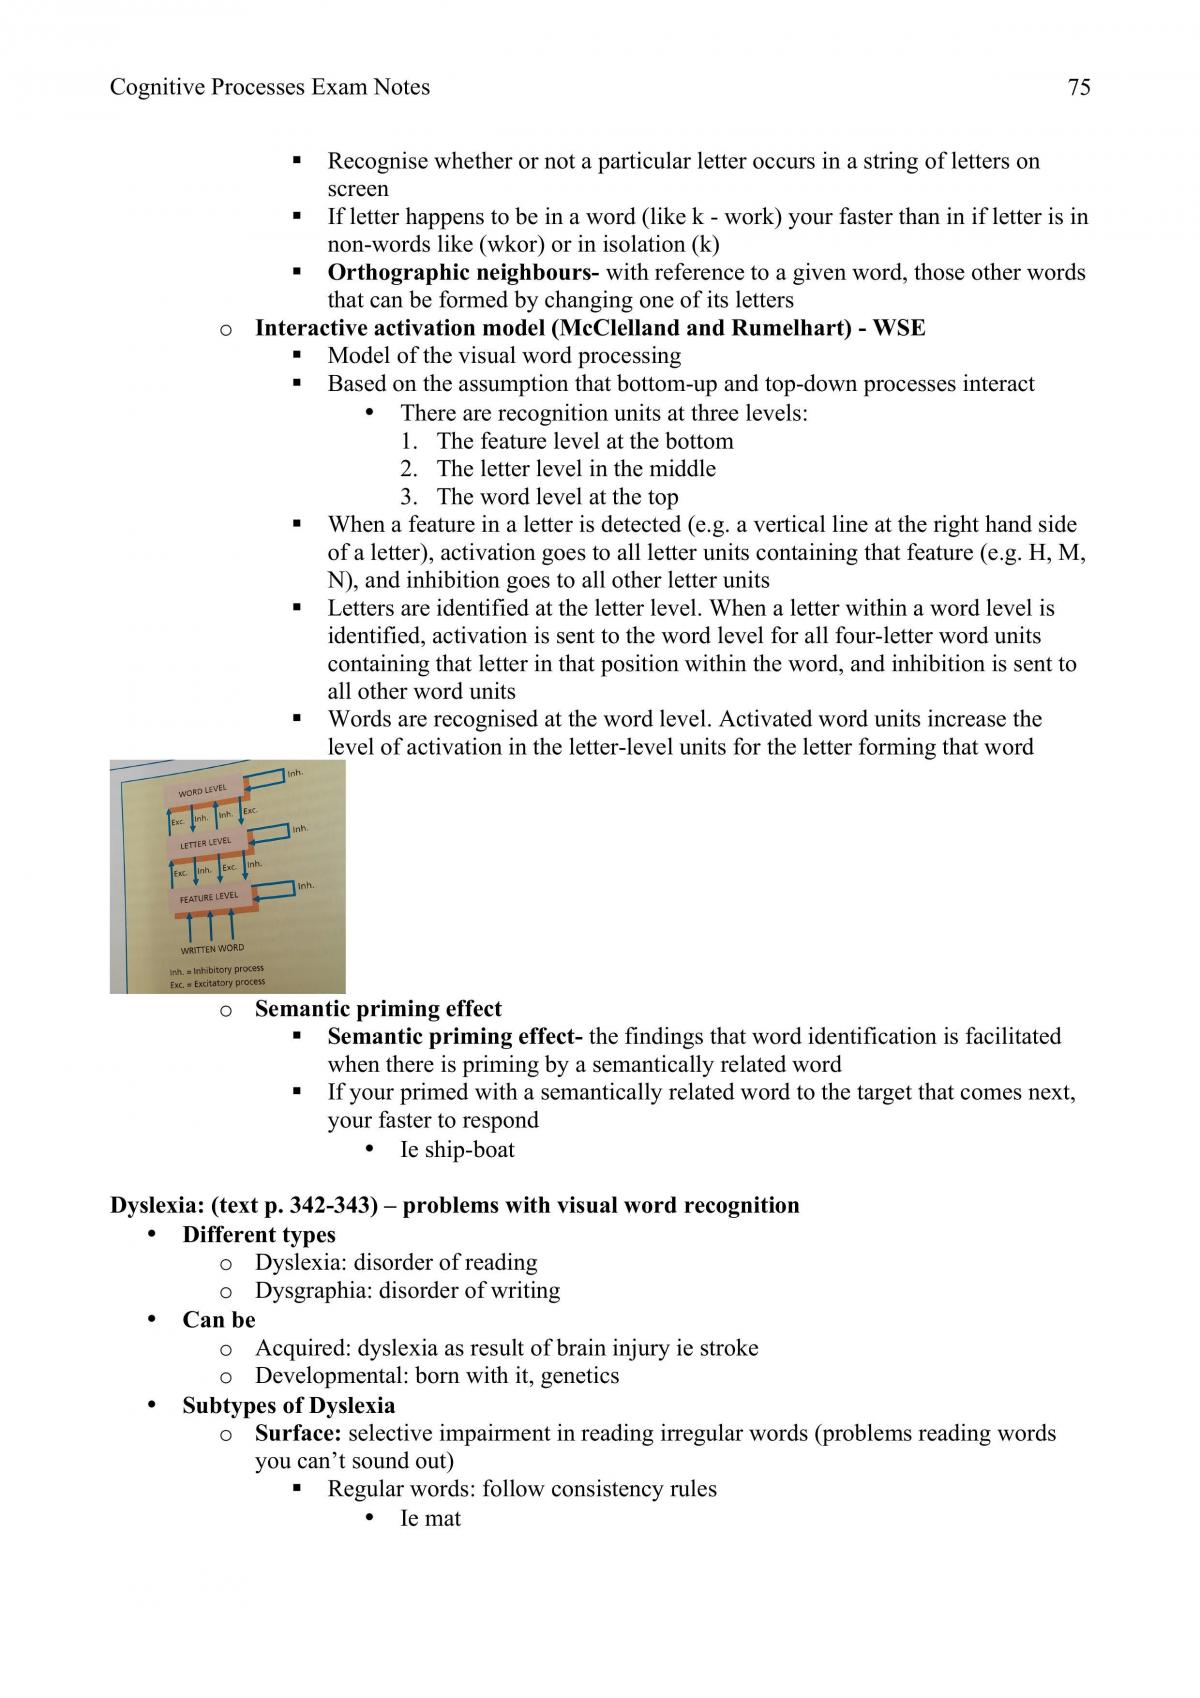 Comprehensive complete lecture and book notes - Page 75